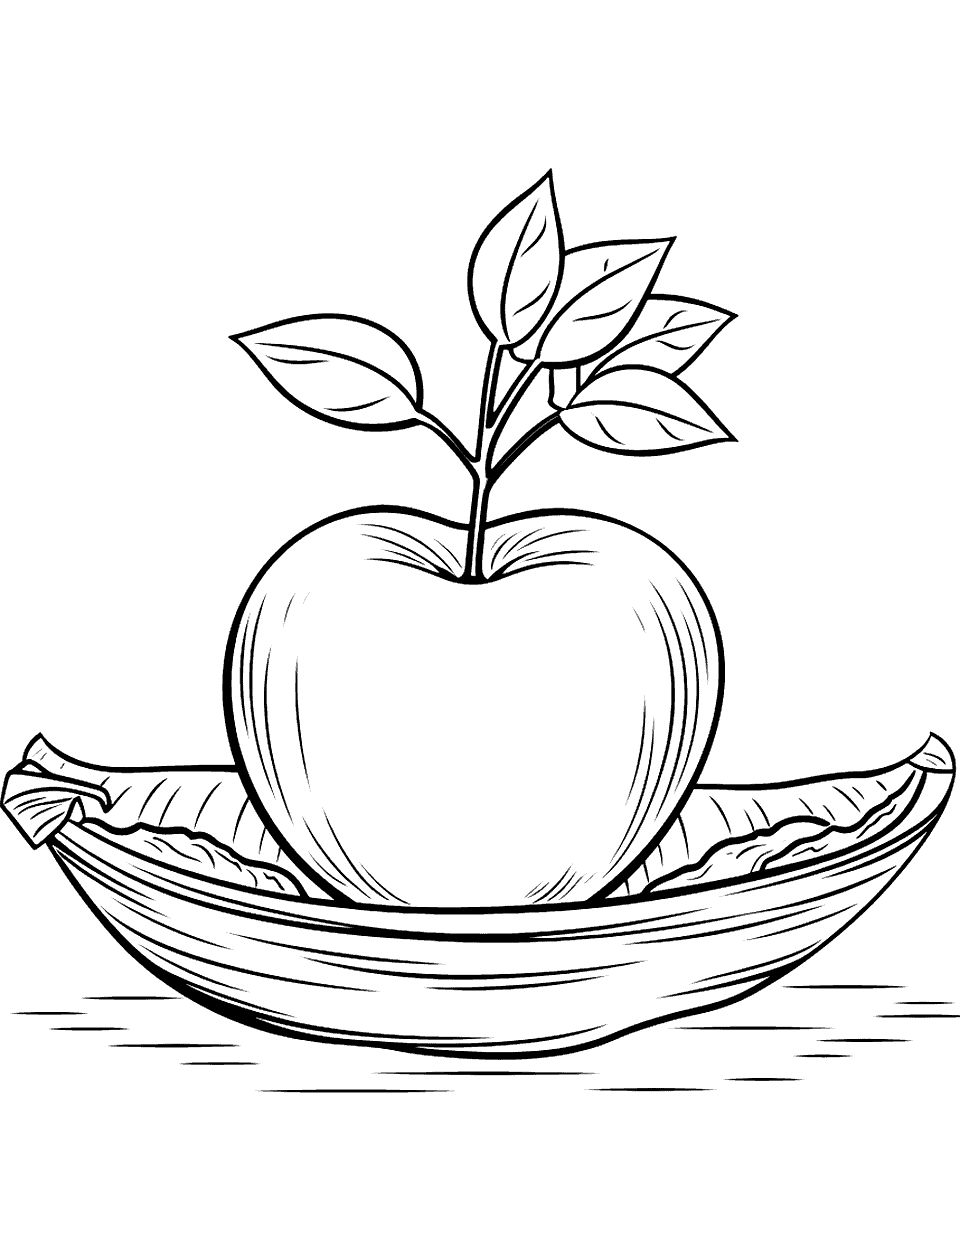 Apple in a Boat Coloring Page - An apple in a paper boat floating on a puddle.